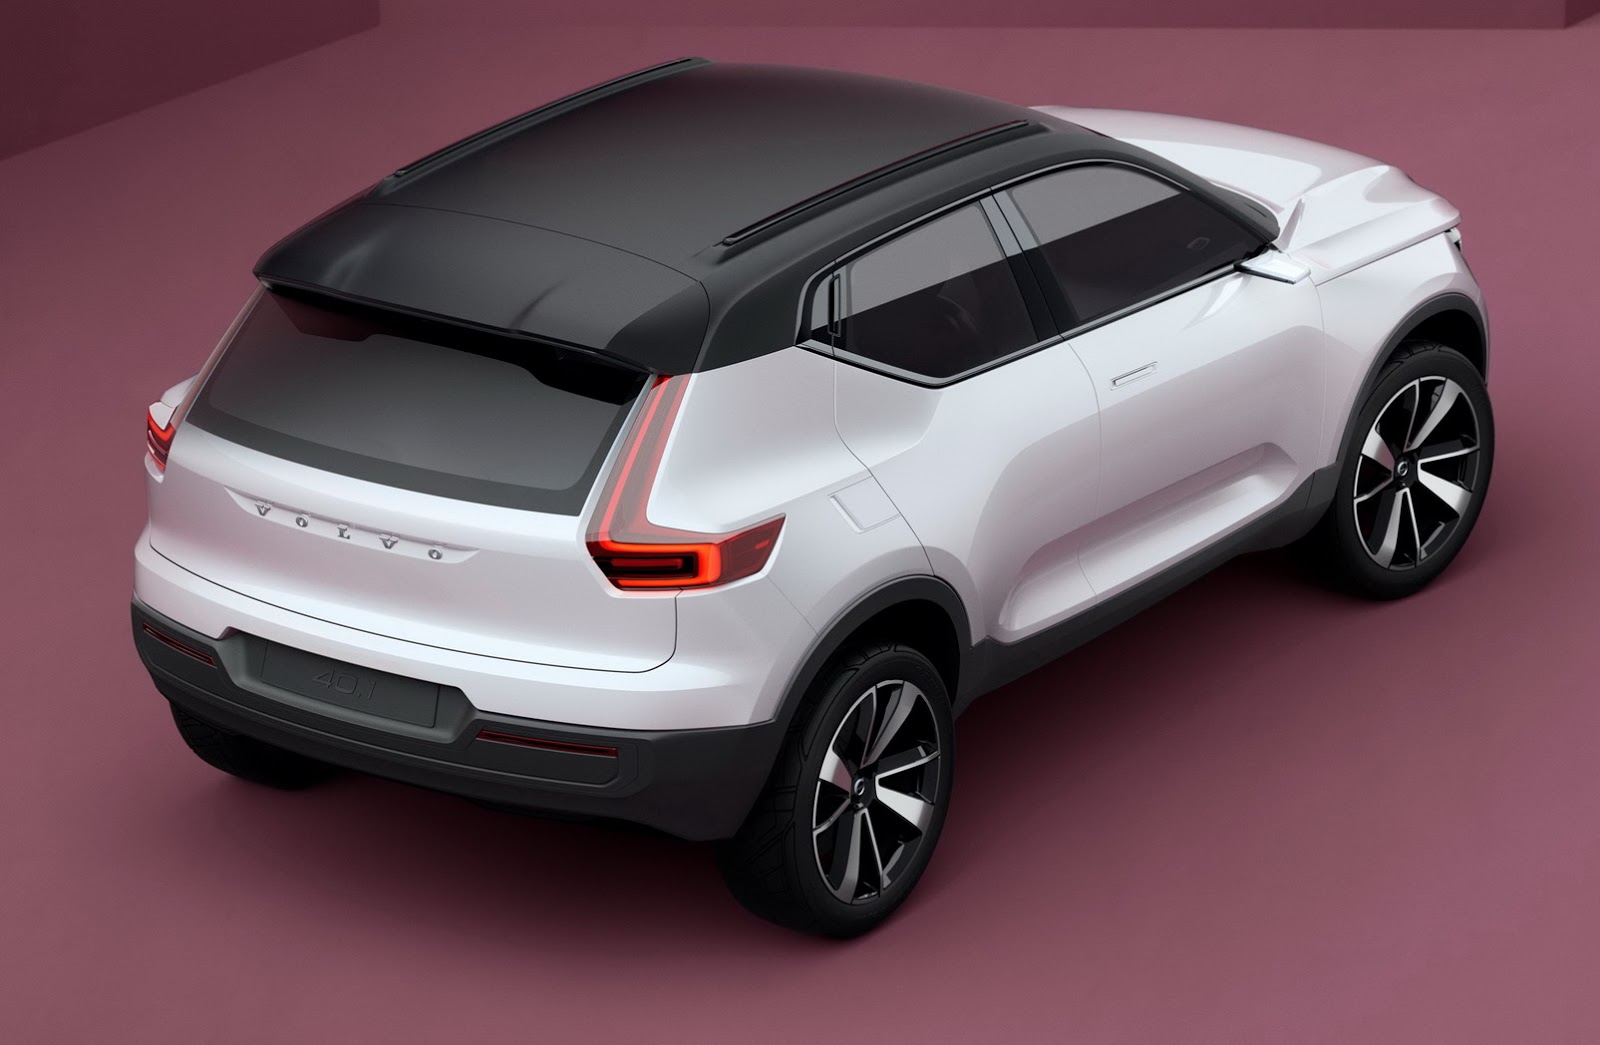 Concept Model of the Volvo XC40 at rear end